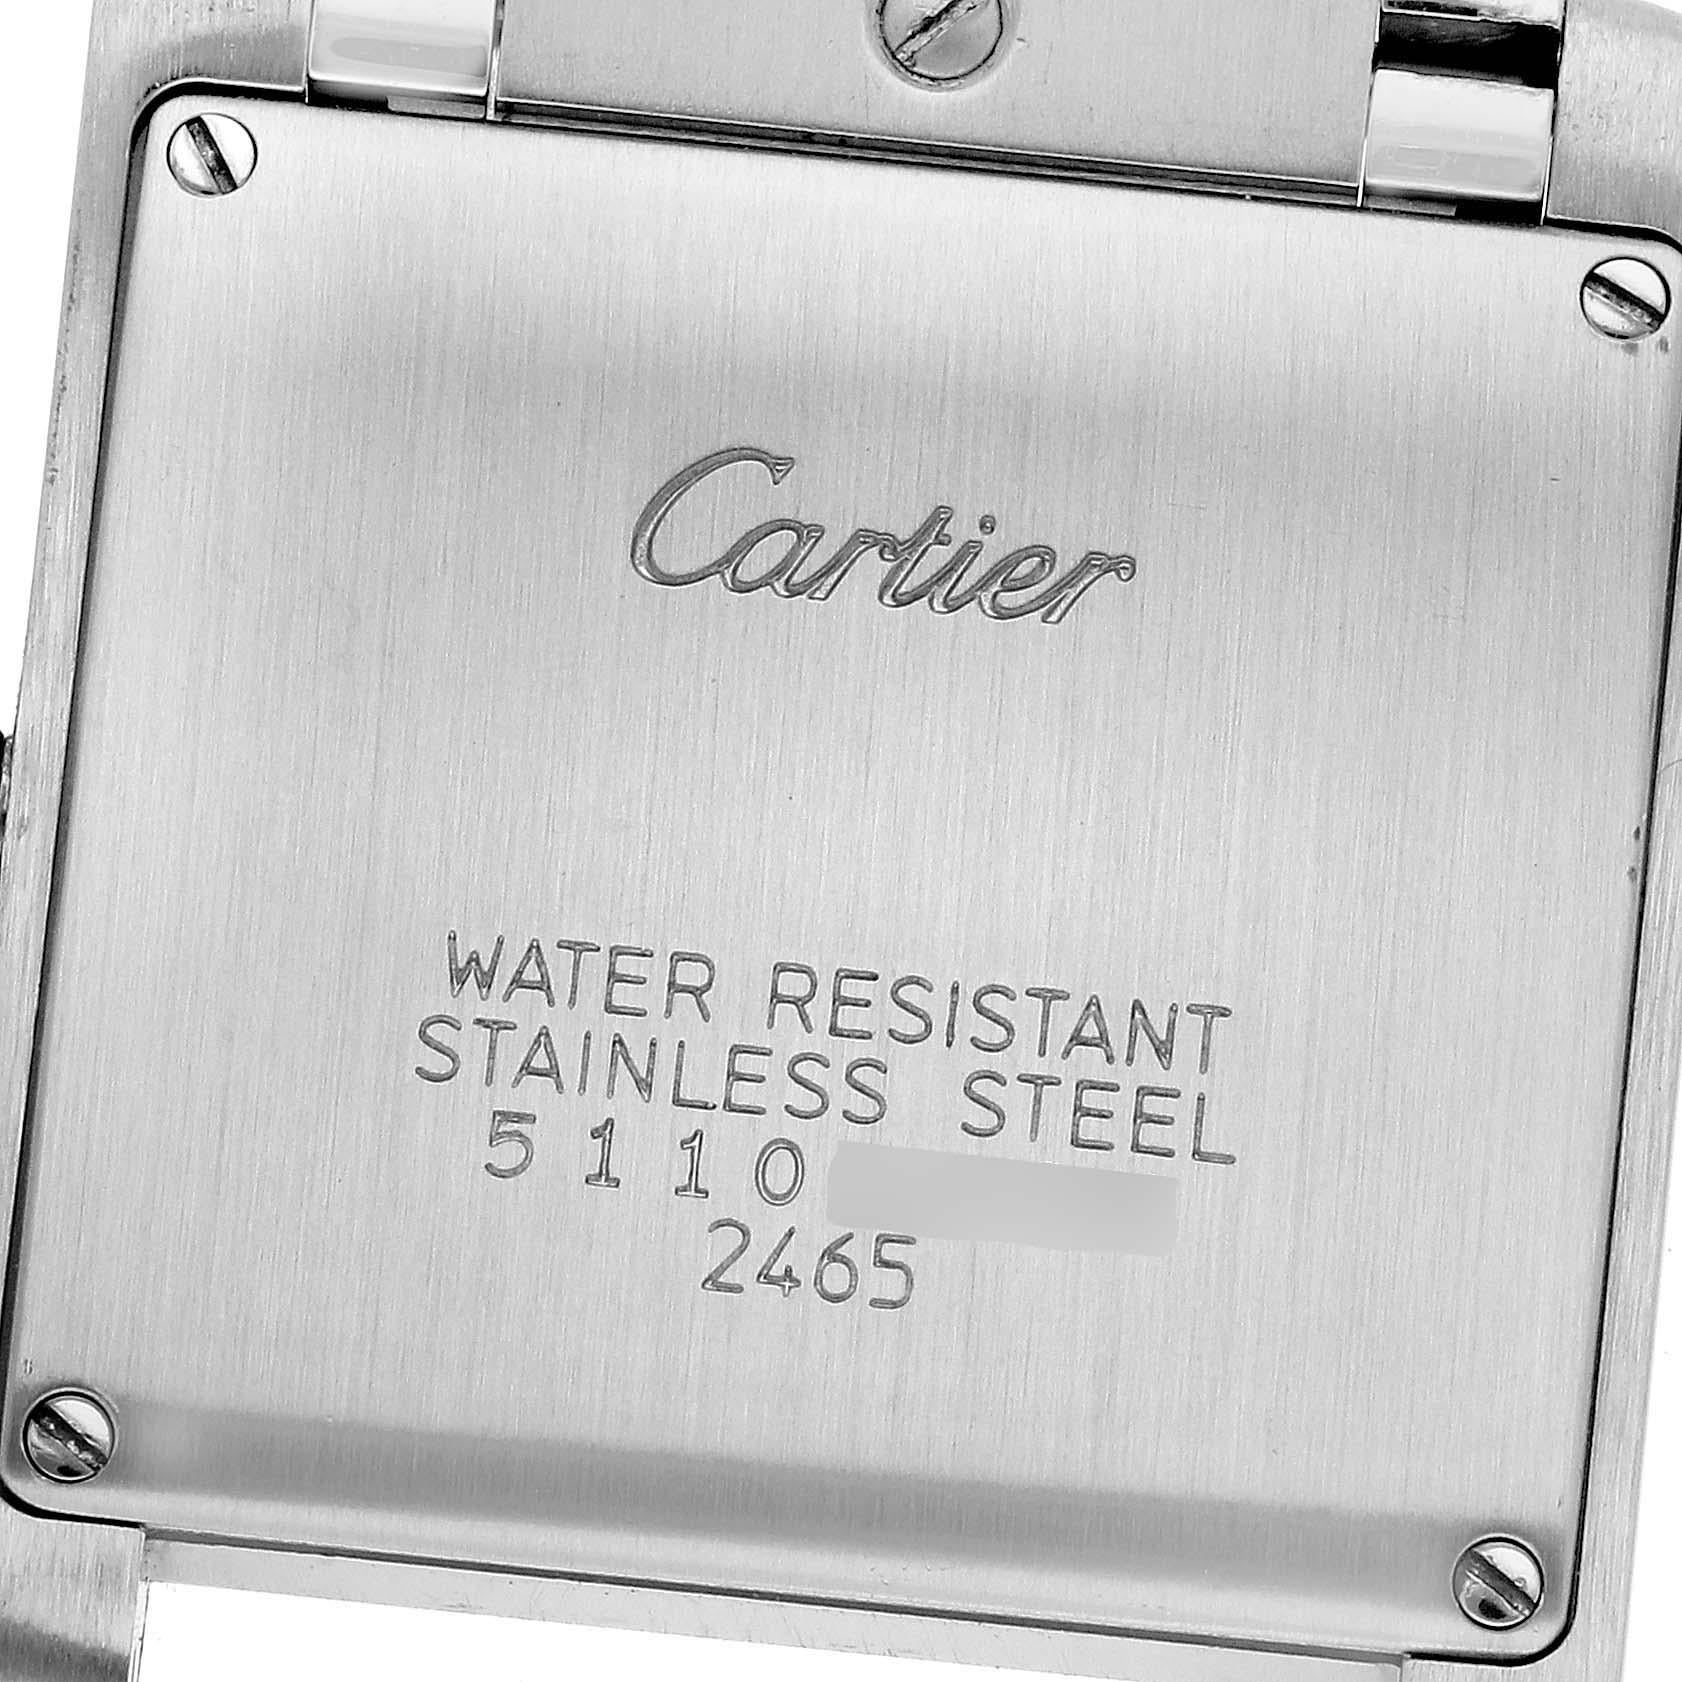 Cartier Tank Francaise Midsize Steel Yellow Gold Ladies Watch W51012Q4. Quartz movement. Rectangular stainless steel 25.0 x 30.0 mm case. Octagonal 18k yellow gold crown set with a blue spinel cabochon. . Scratch resistant sapphire crystal. Silver